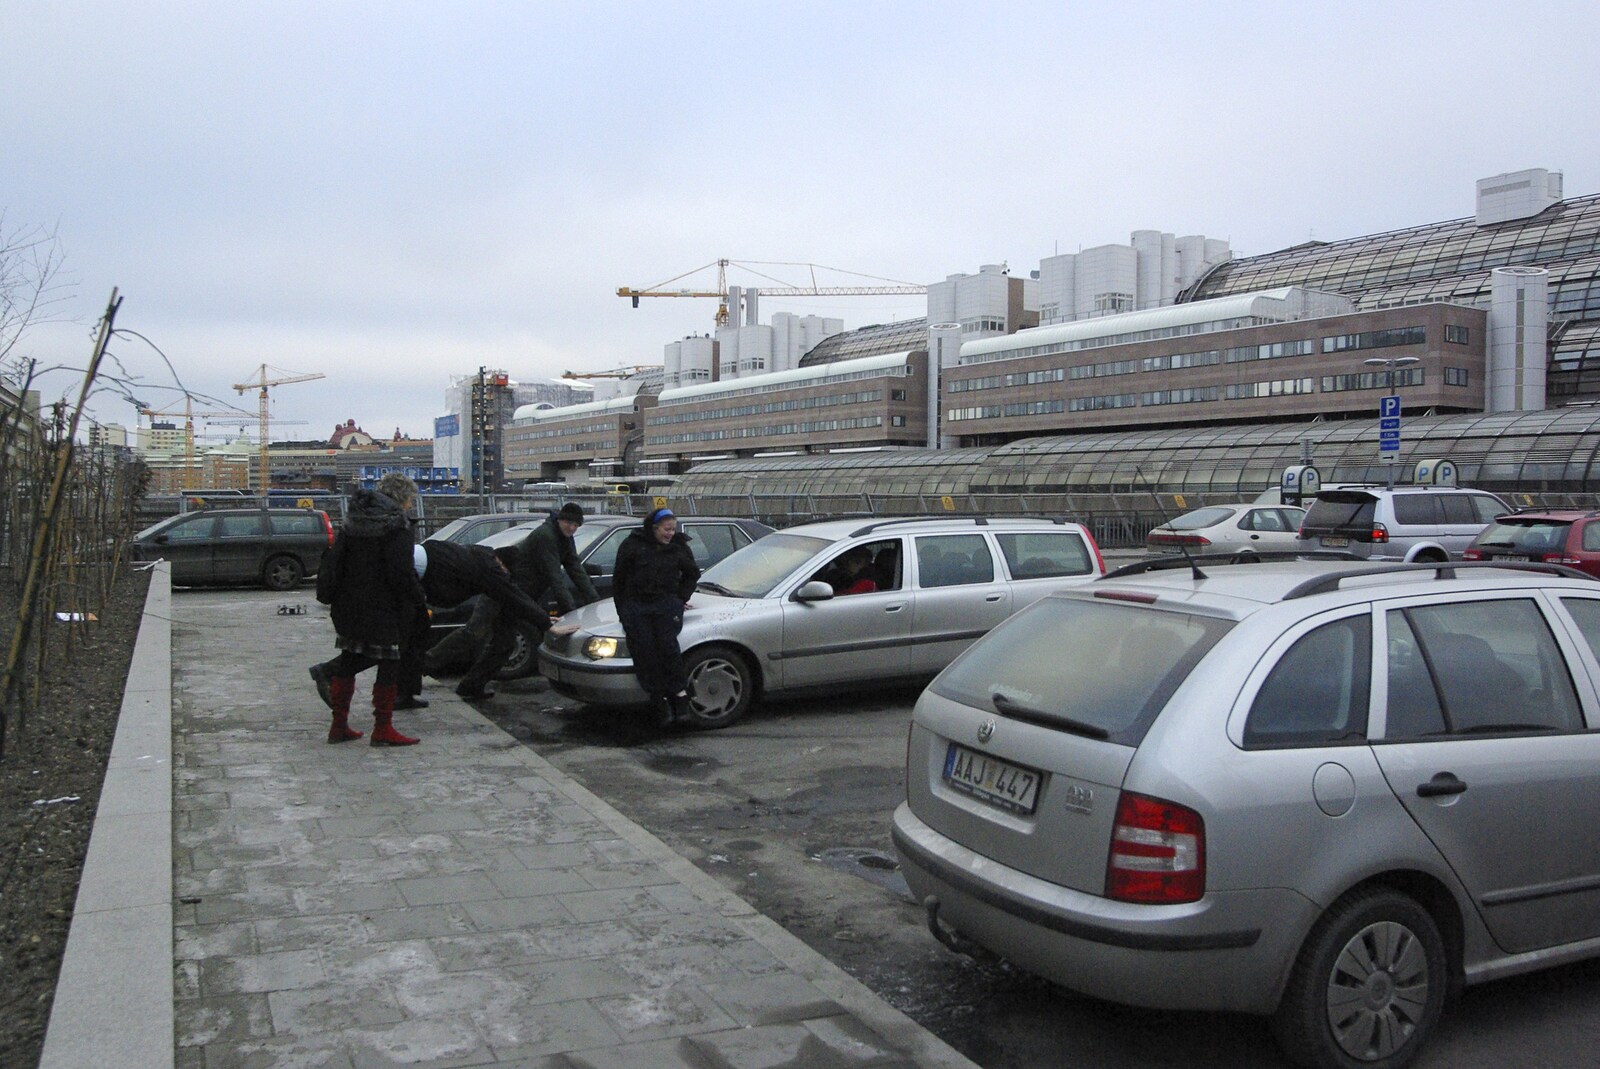 Nosher helps get a car out from an ice trap from A Few Hours in Skansen, Stockholm, Sweden - 17th December 2007